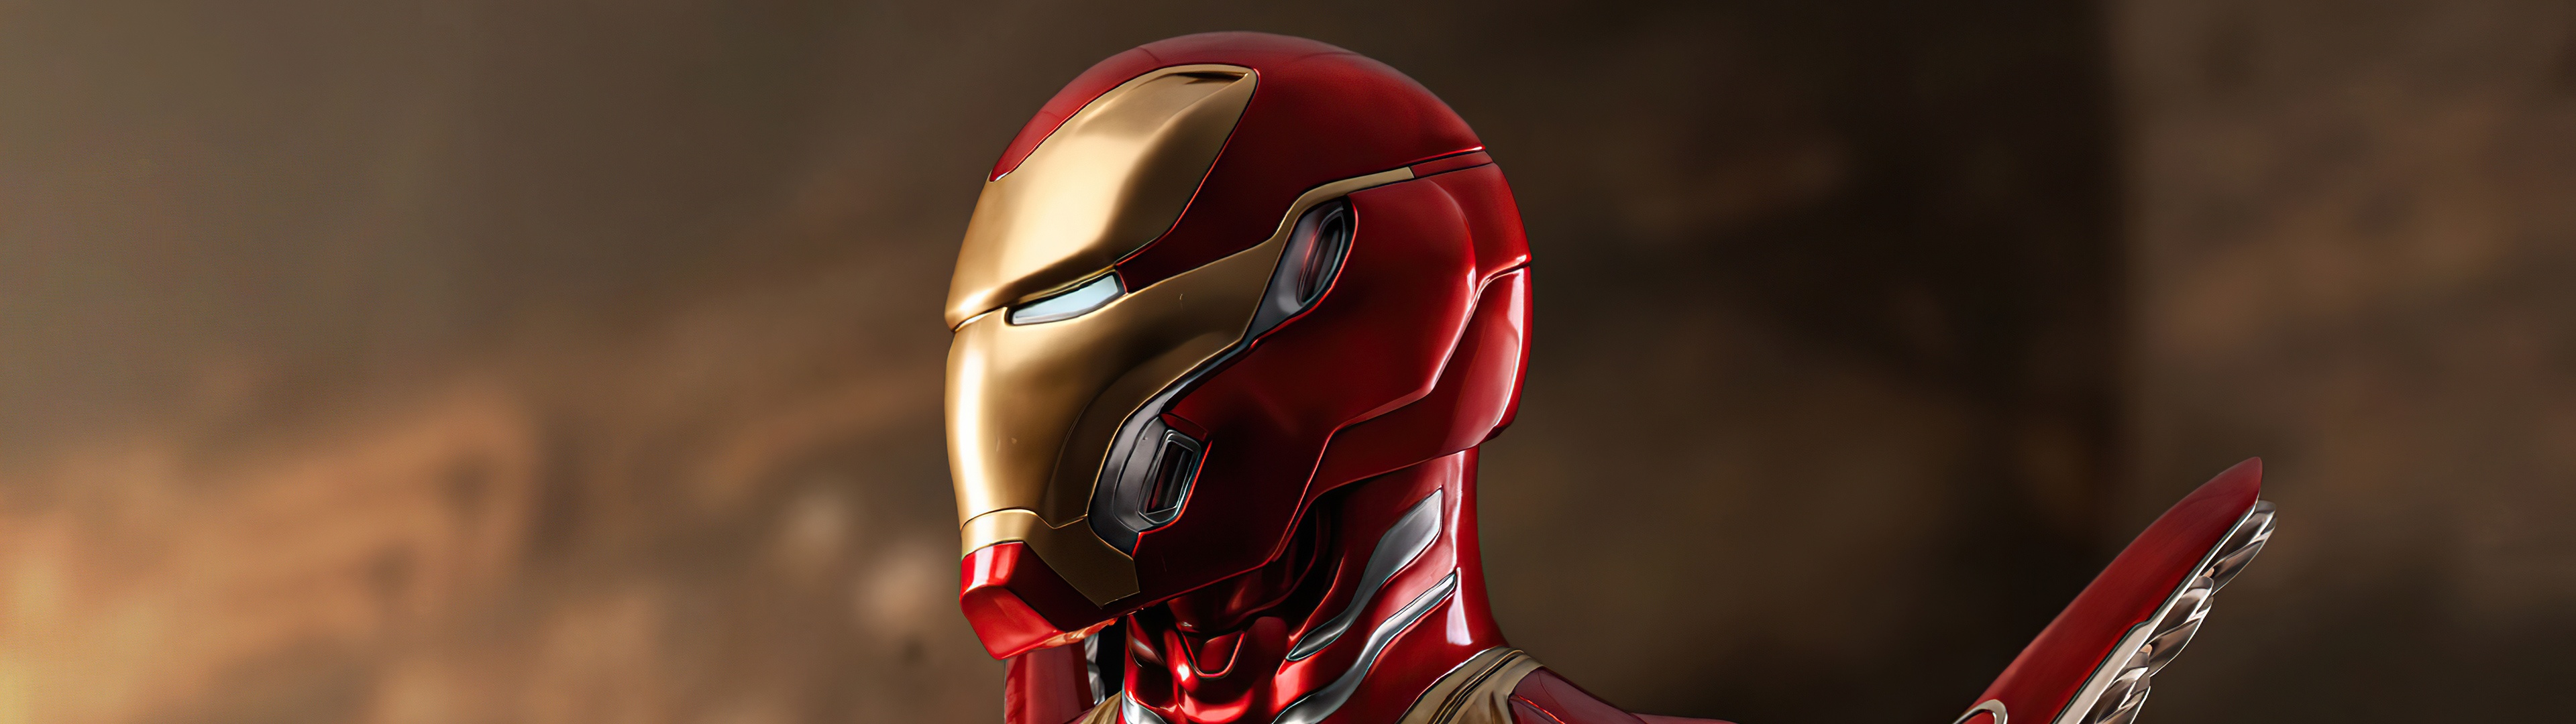 Iron Man Wallpaper HD 77 pictures